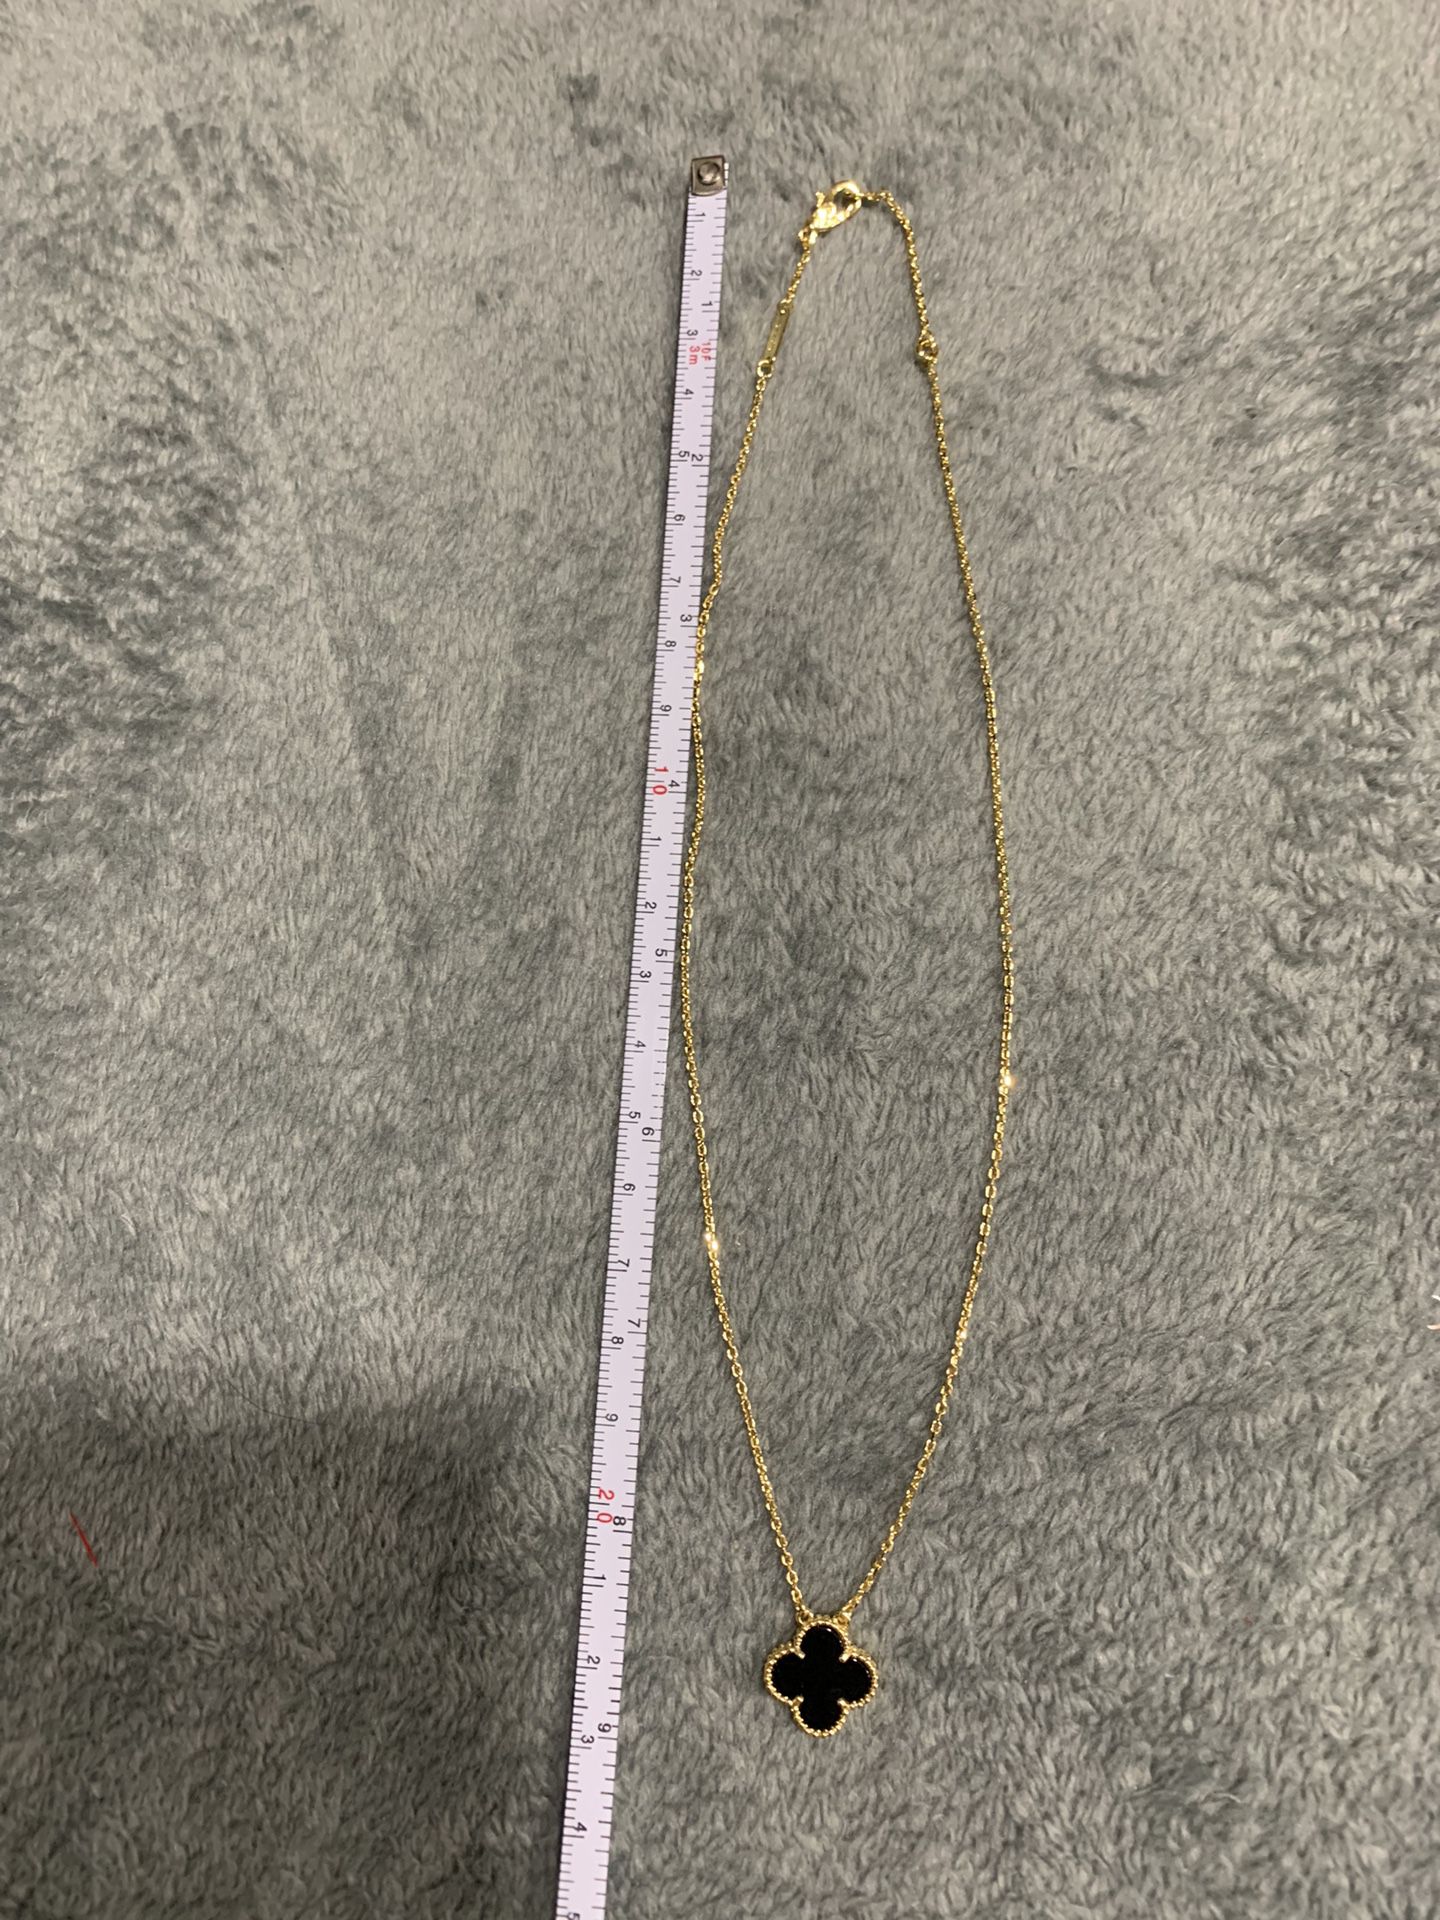 Gold Nike Pendant Chain 18” for Sale in Columbia, SC - OfferUp